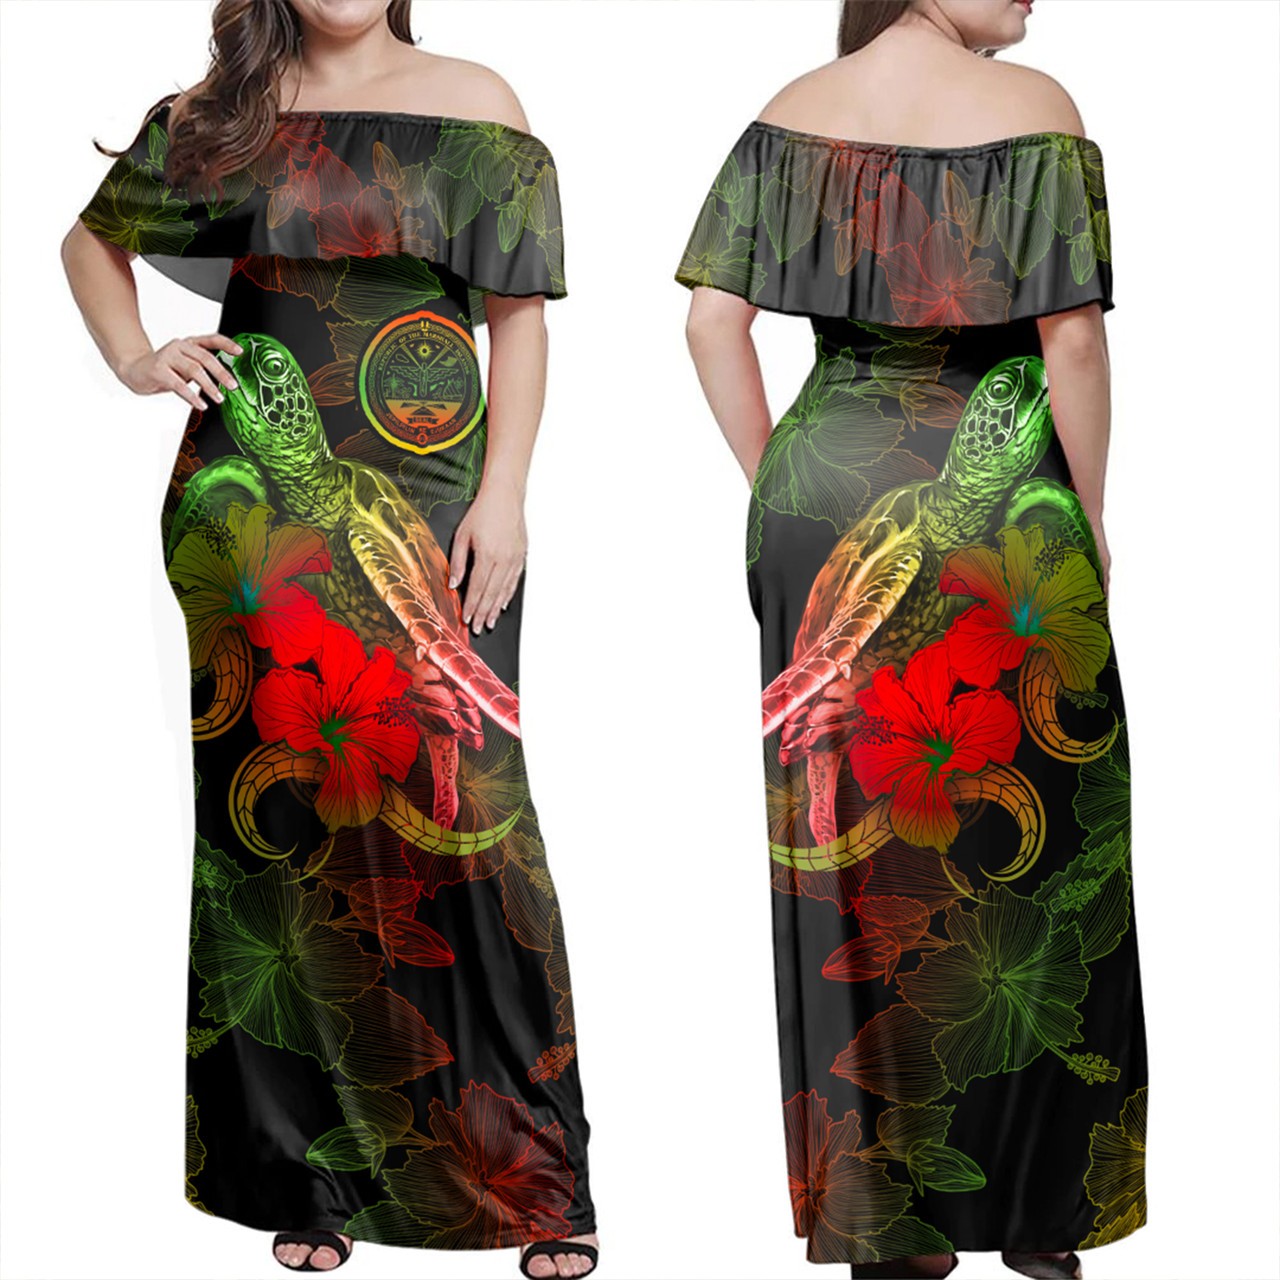 Marshall Islands Woman Off Shoulder Long Dress - Sea Turtle With Blooming Hibiscus Flowers Reggae